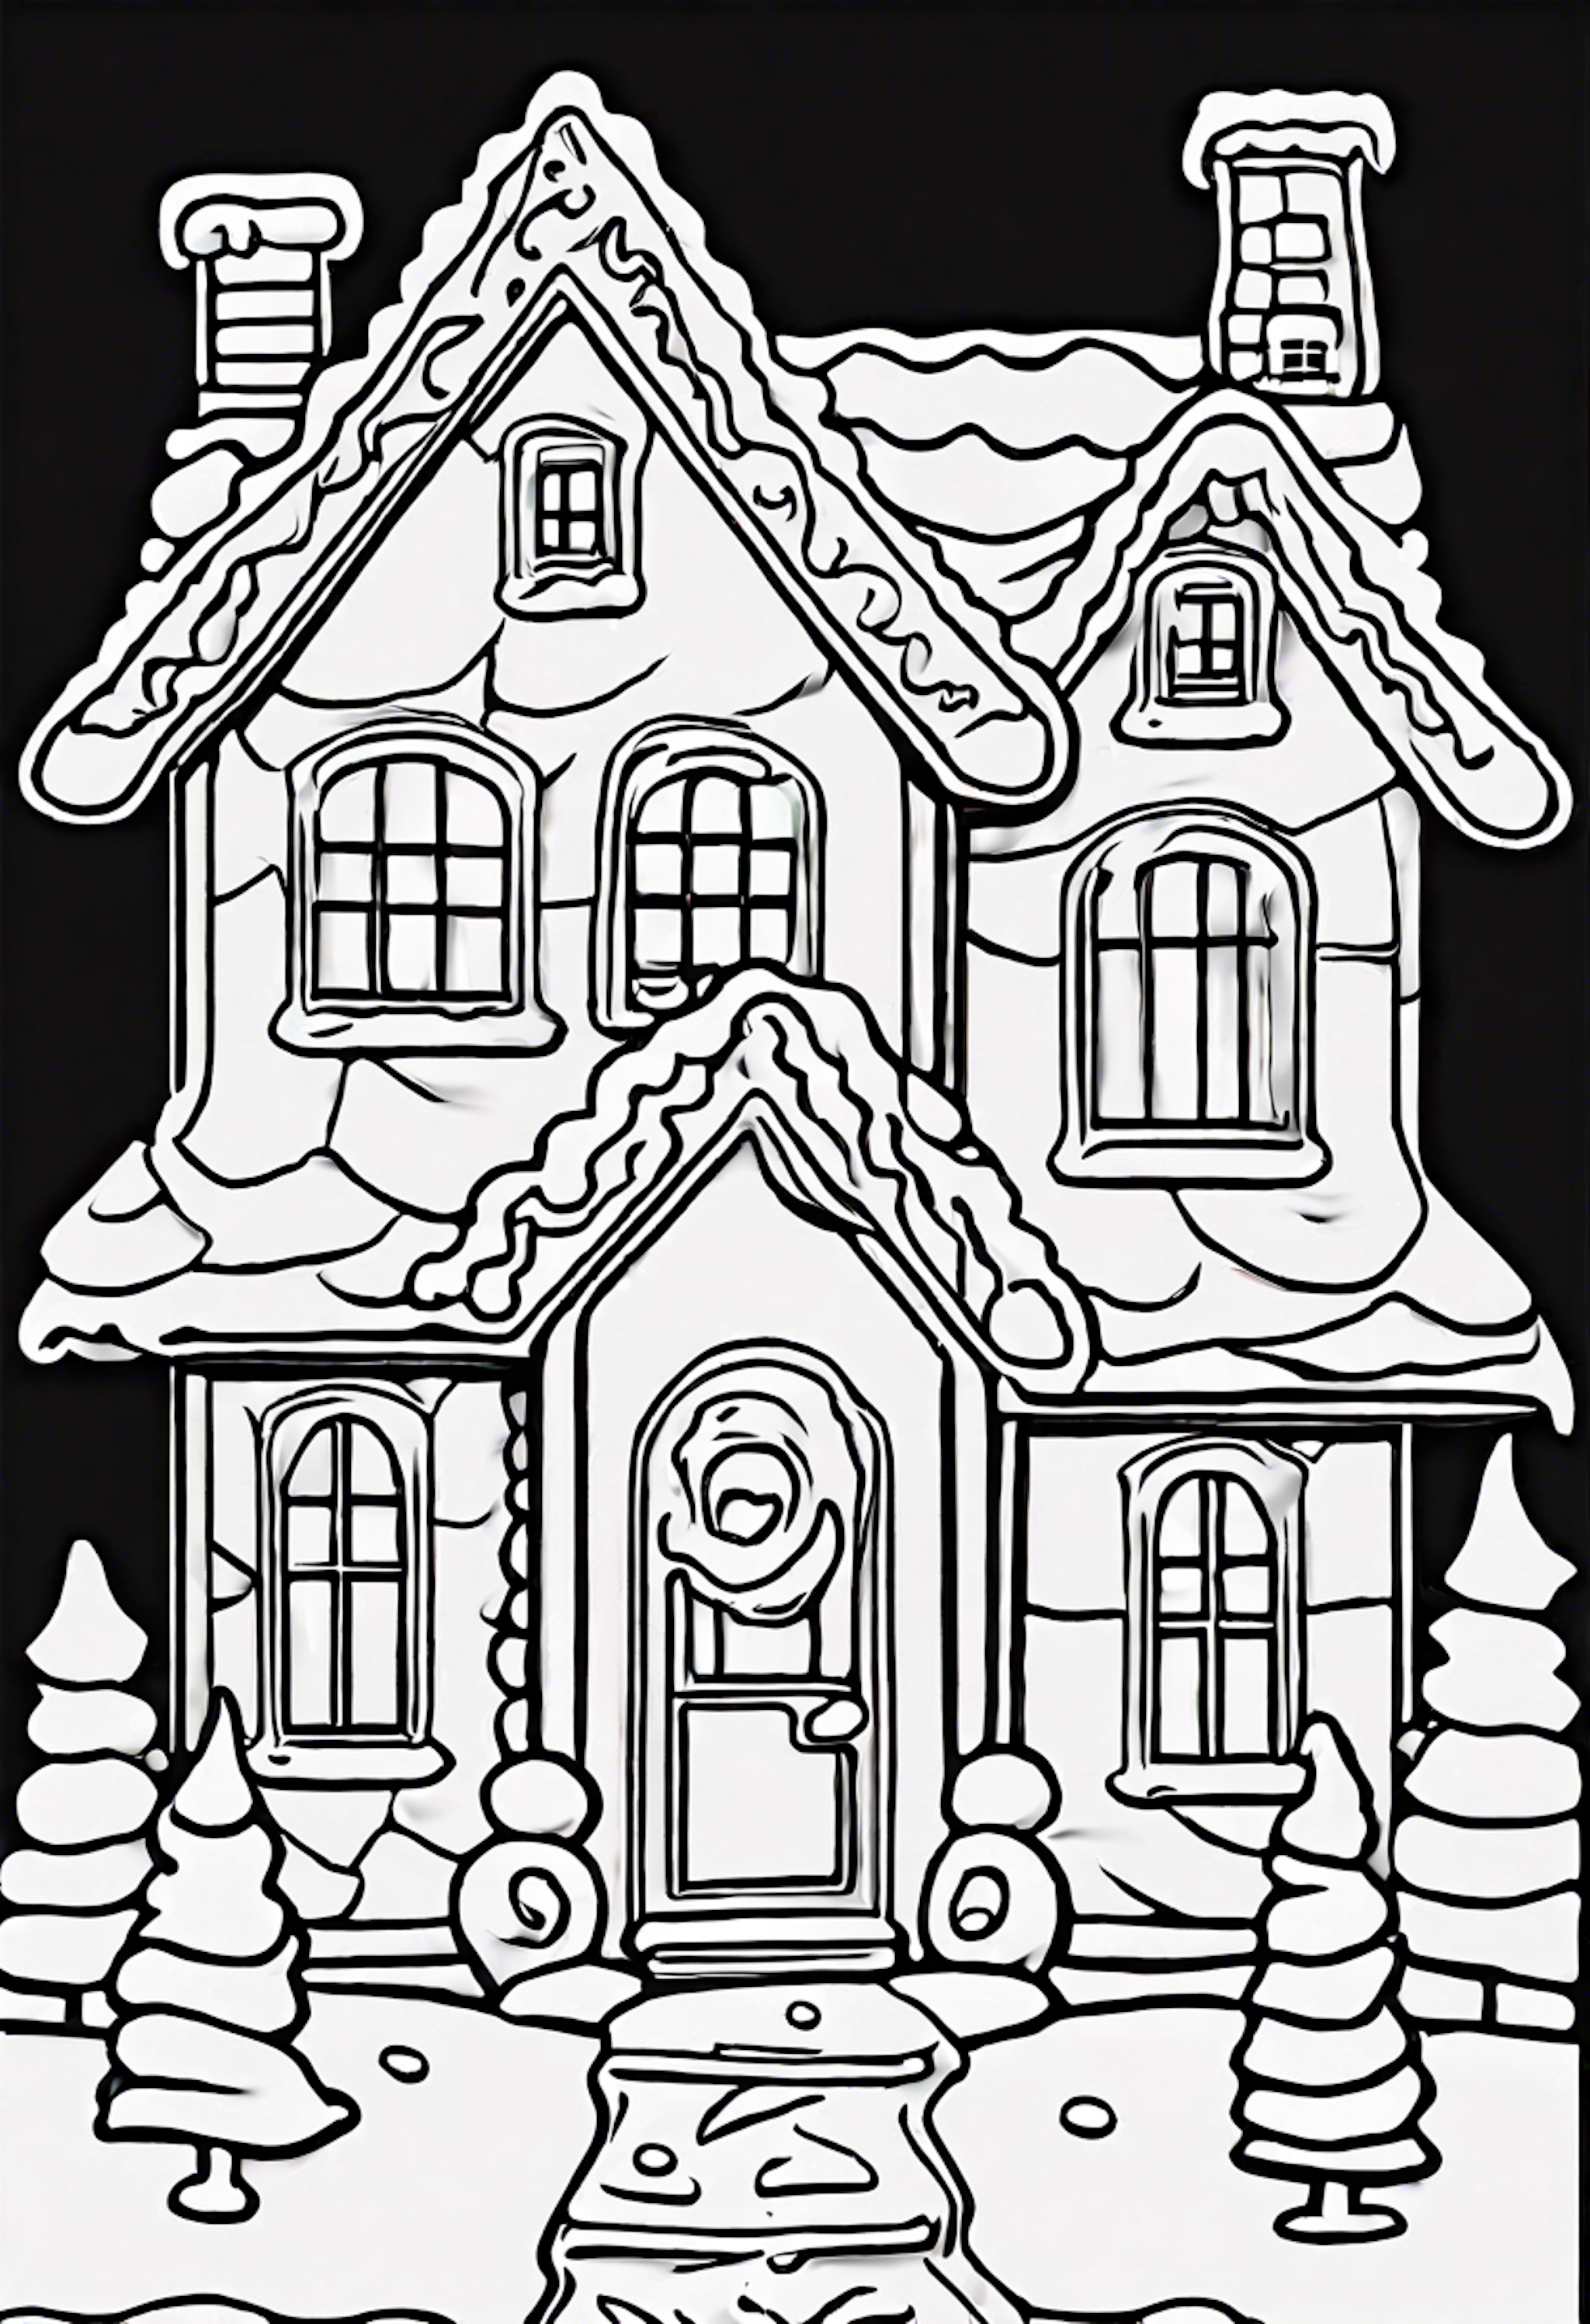 A coloring page for 1 Gingerbread House coloring pages